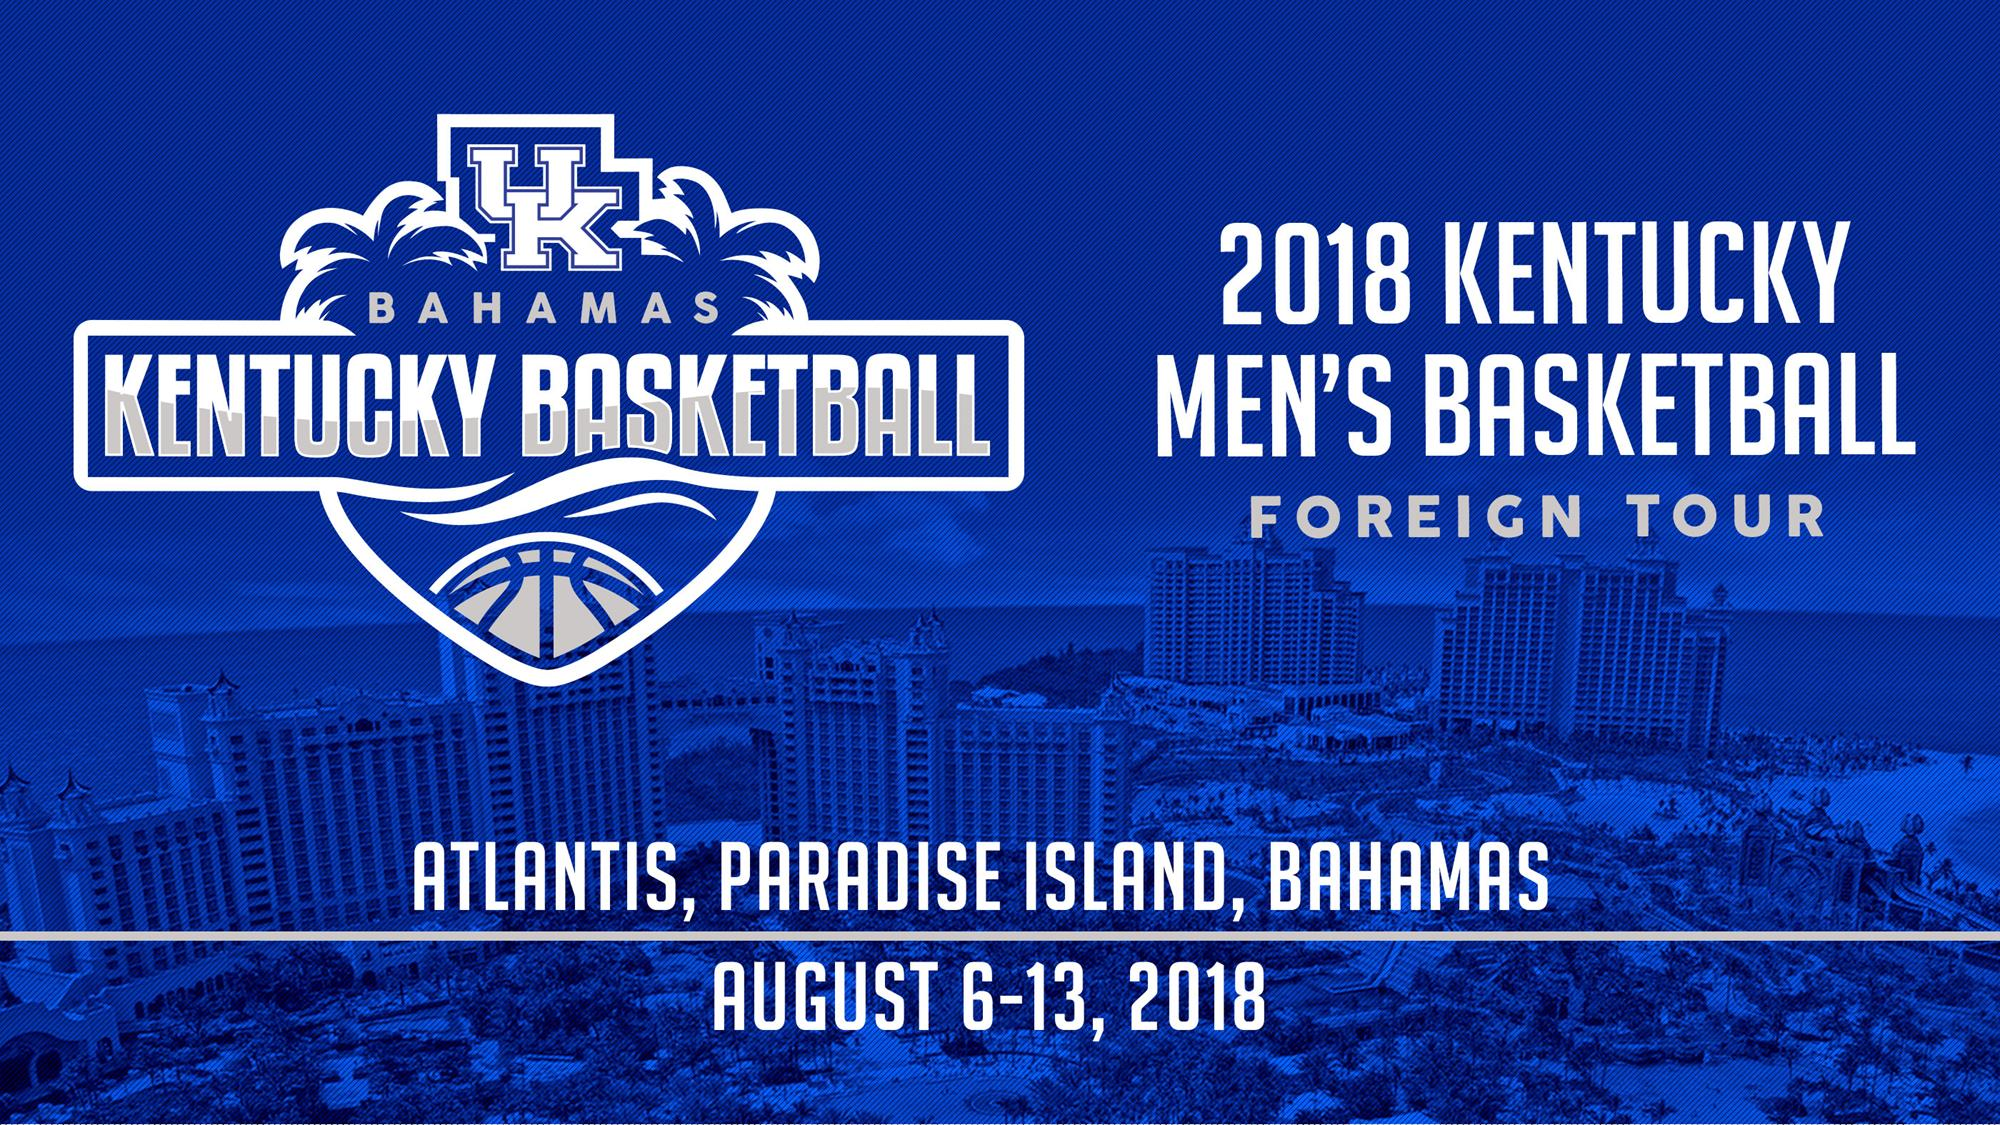 UK Men’s Basketball to Return to Bahamas for Foreign Trip